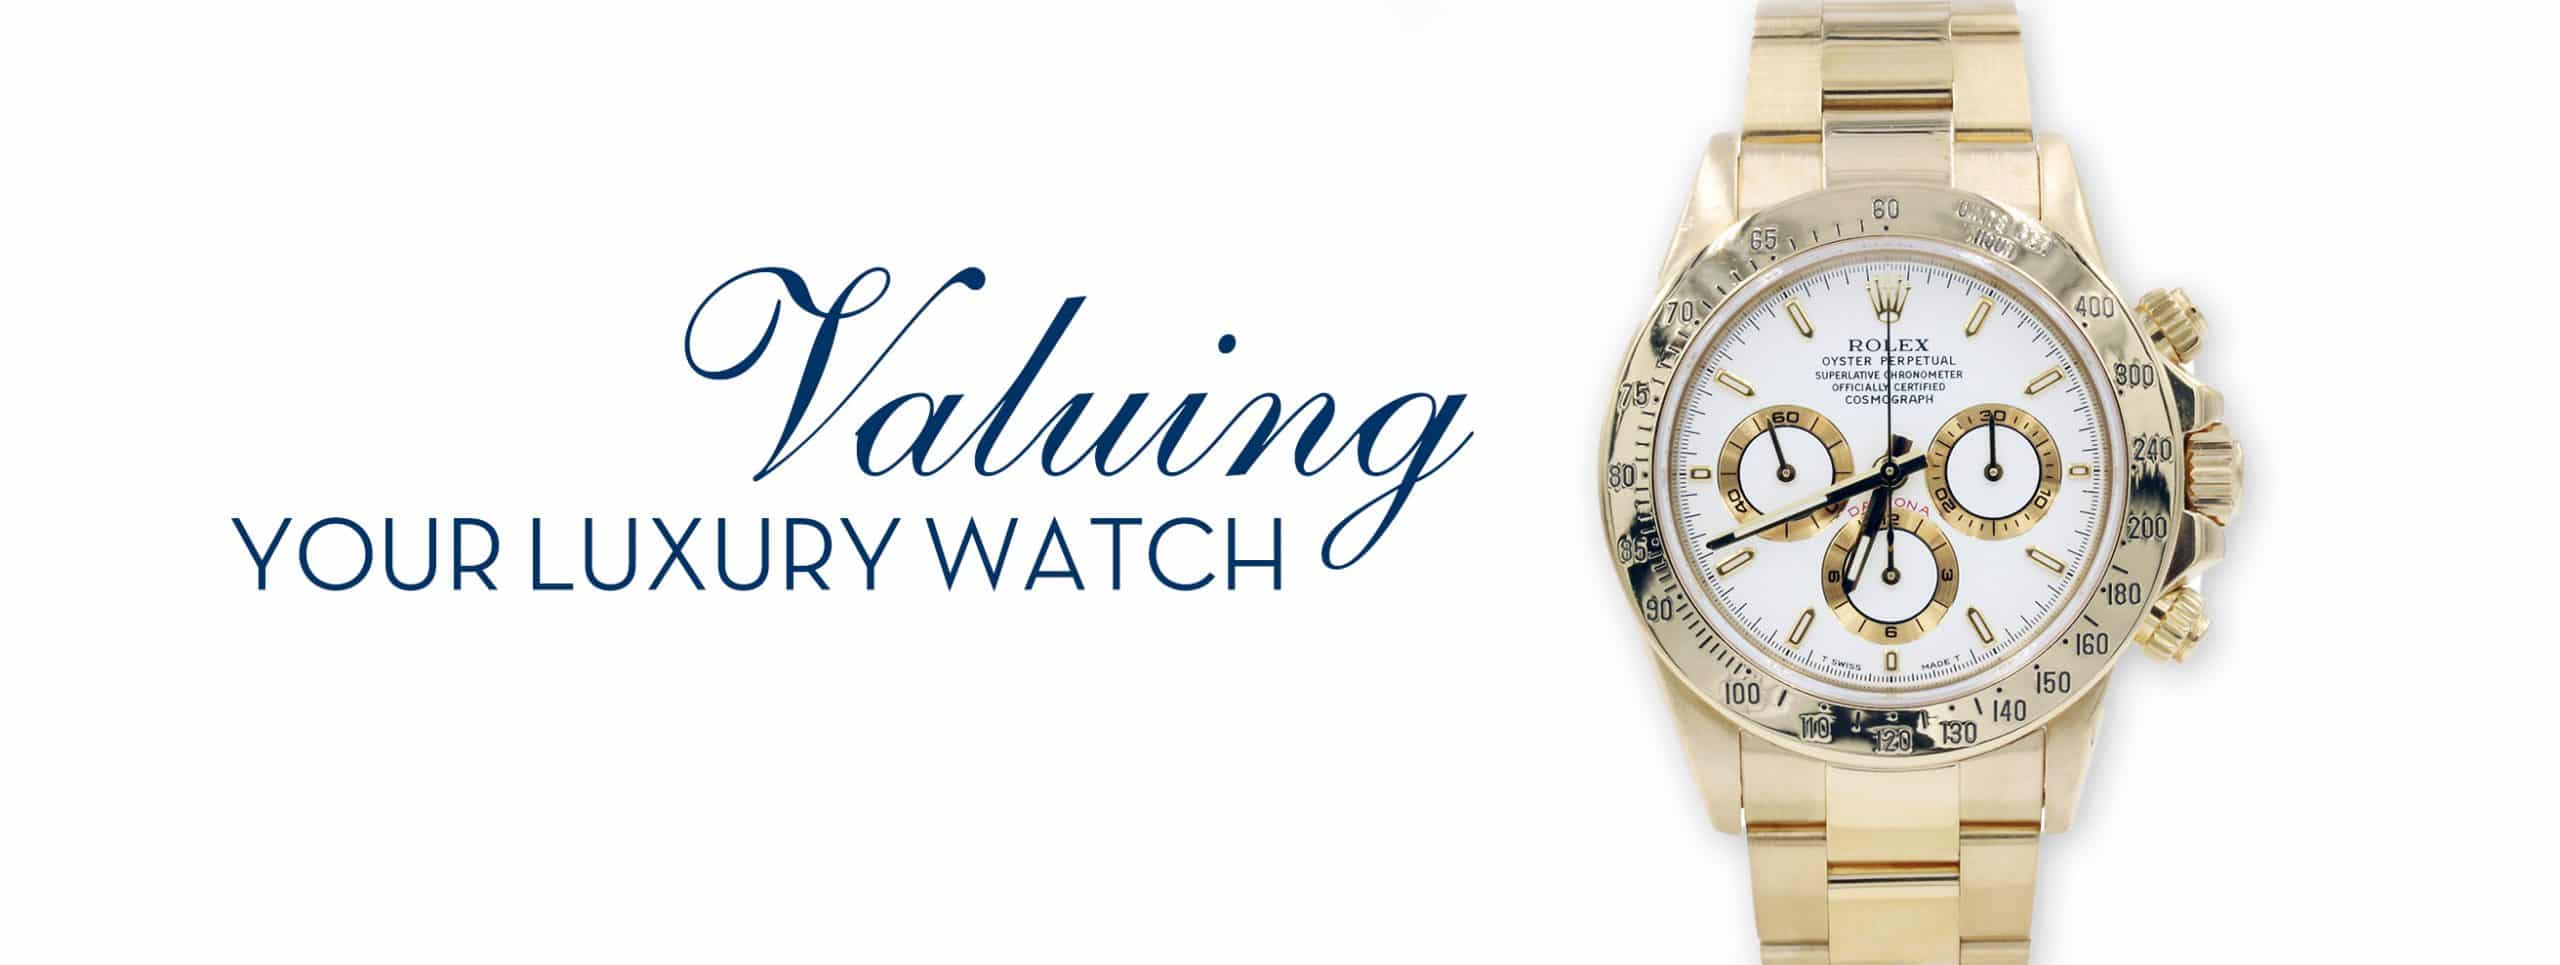 how to find the value of a rolex watch